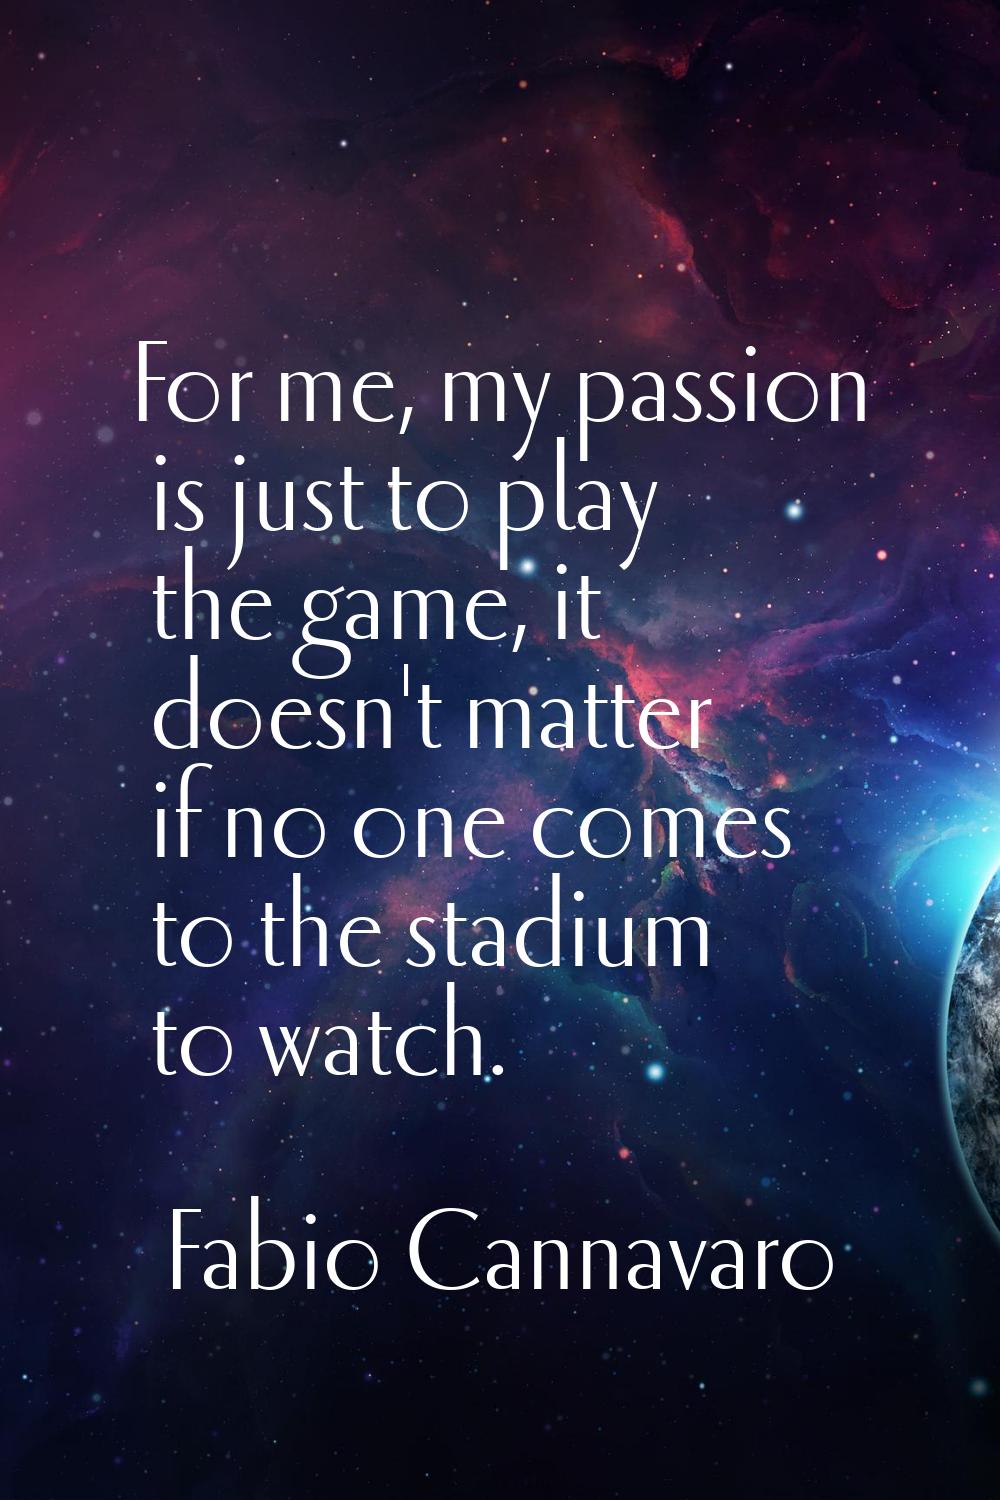 For me, my passion is just to play the game, it doesn't matter if no one comes to the stadium to wa